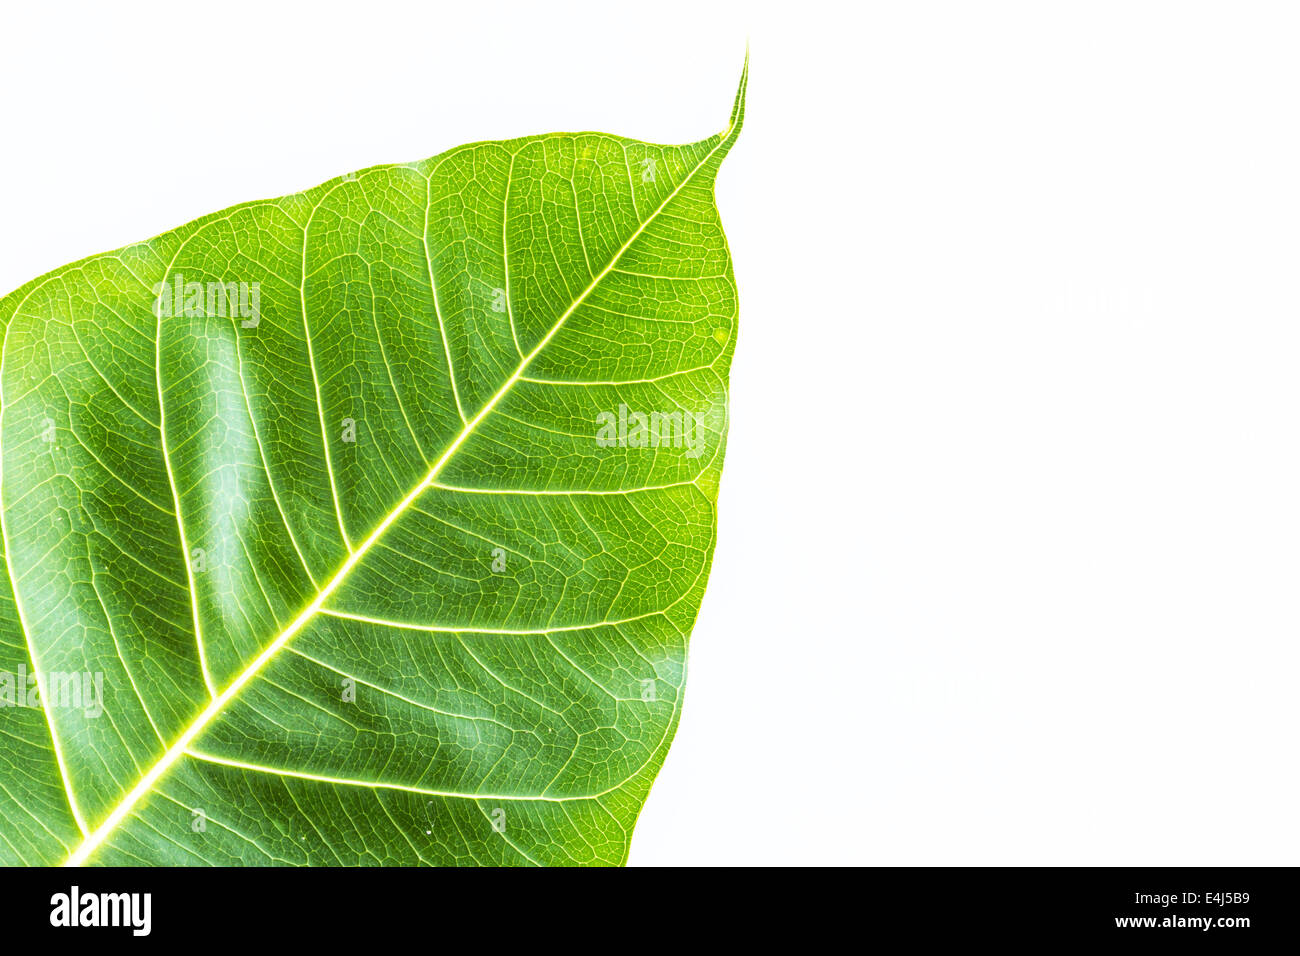 Texture Bodhi or Sacred fig leaf on white background. Stock Photo